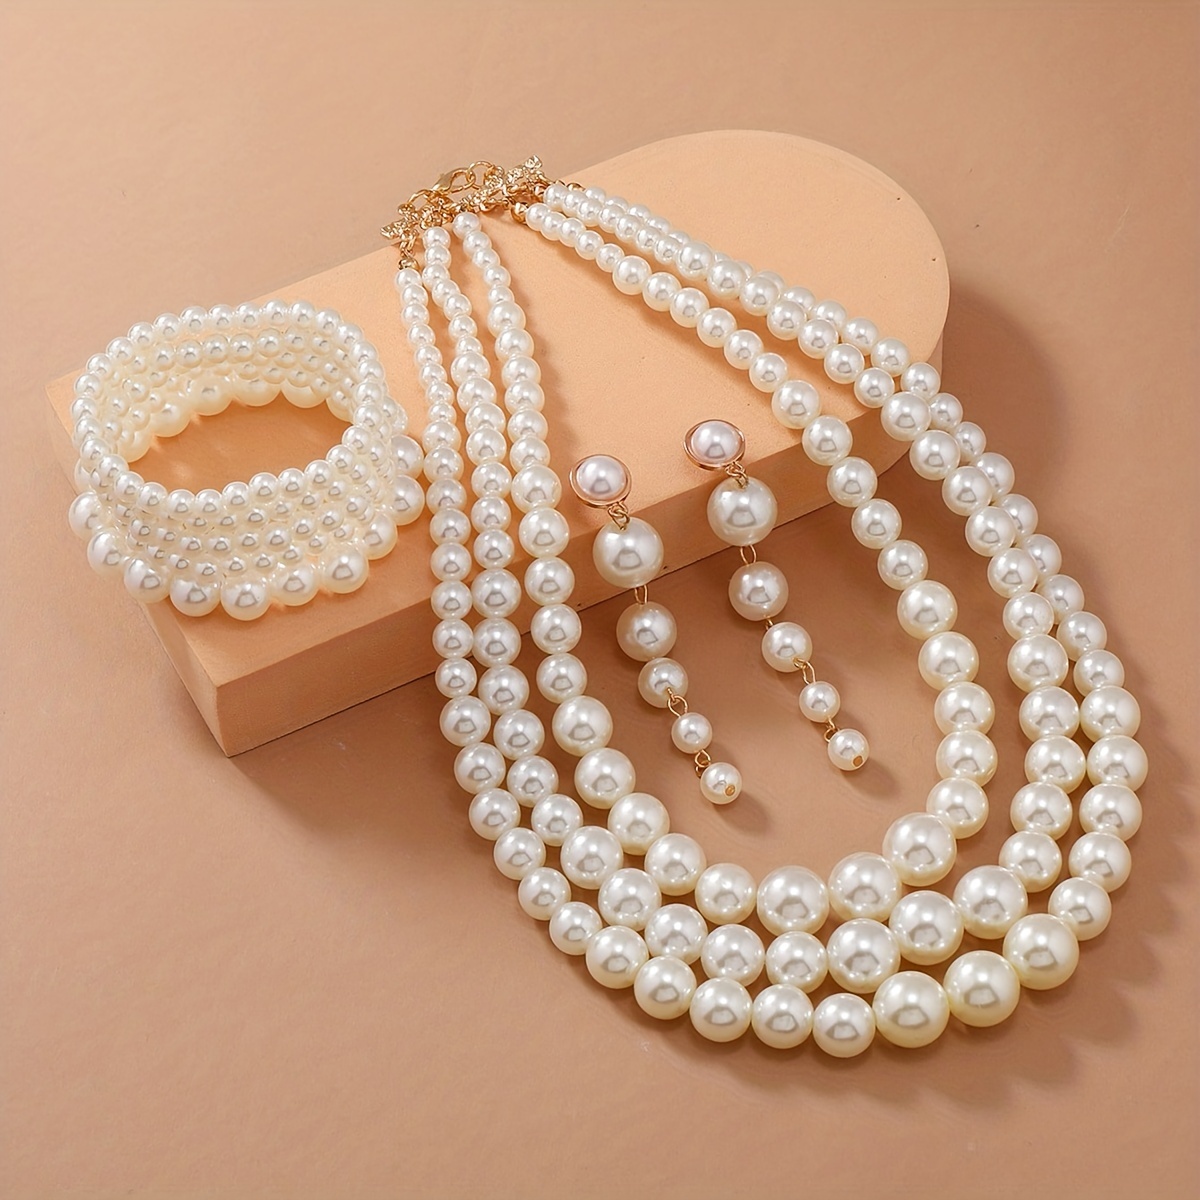 3 Pcs 1920s Pearl Jewelry Set for Woman Pearl Necklace and Earring Set  Including Vintage Flapper Earrings Multilayer Pearl Necklace Bracelet Pearl  Set